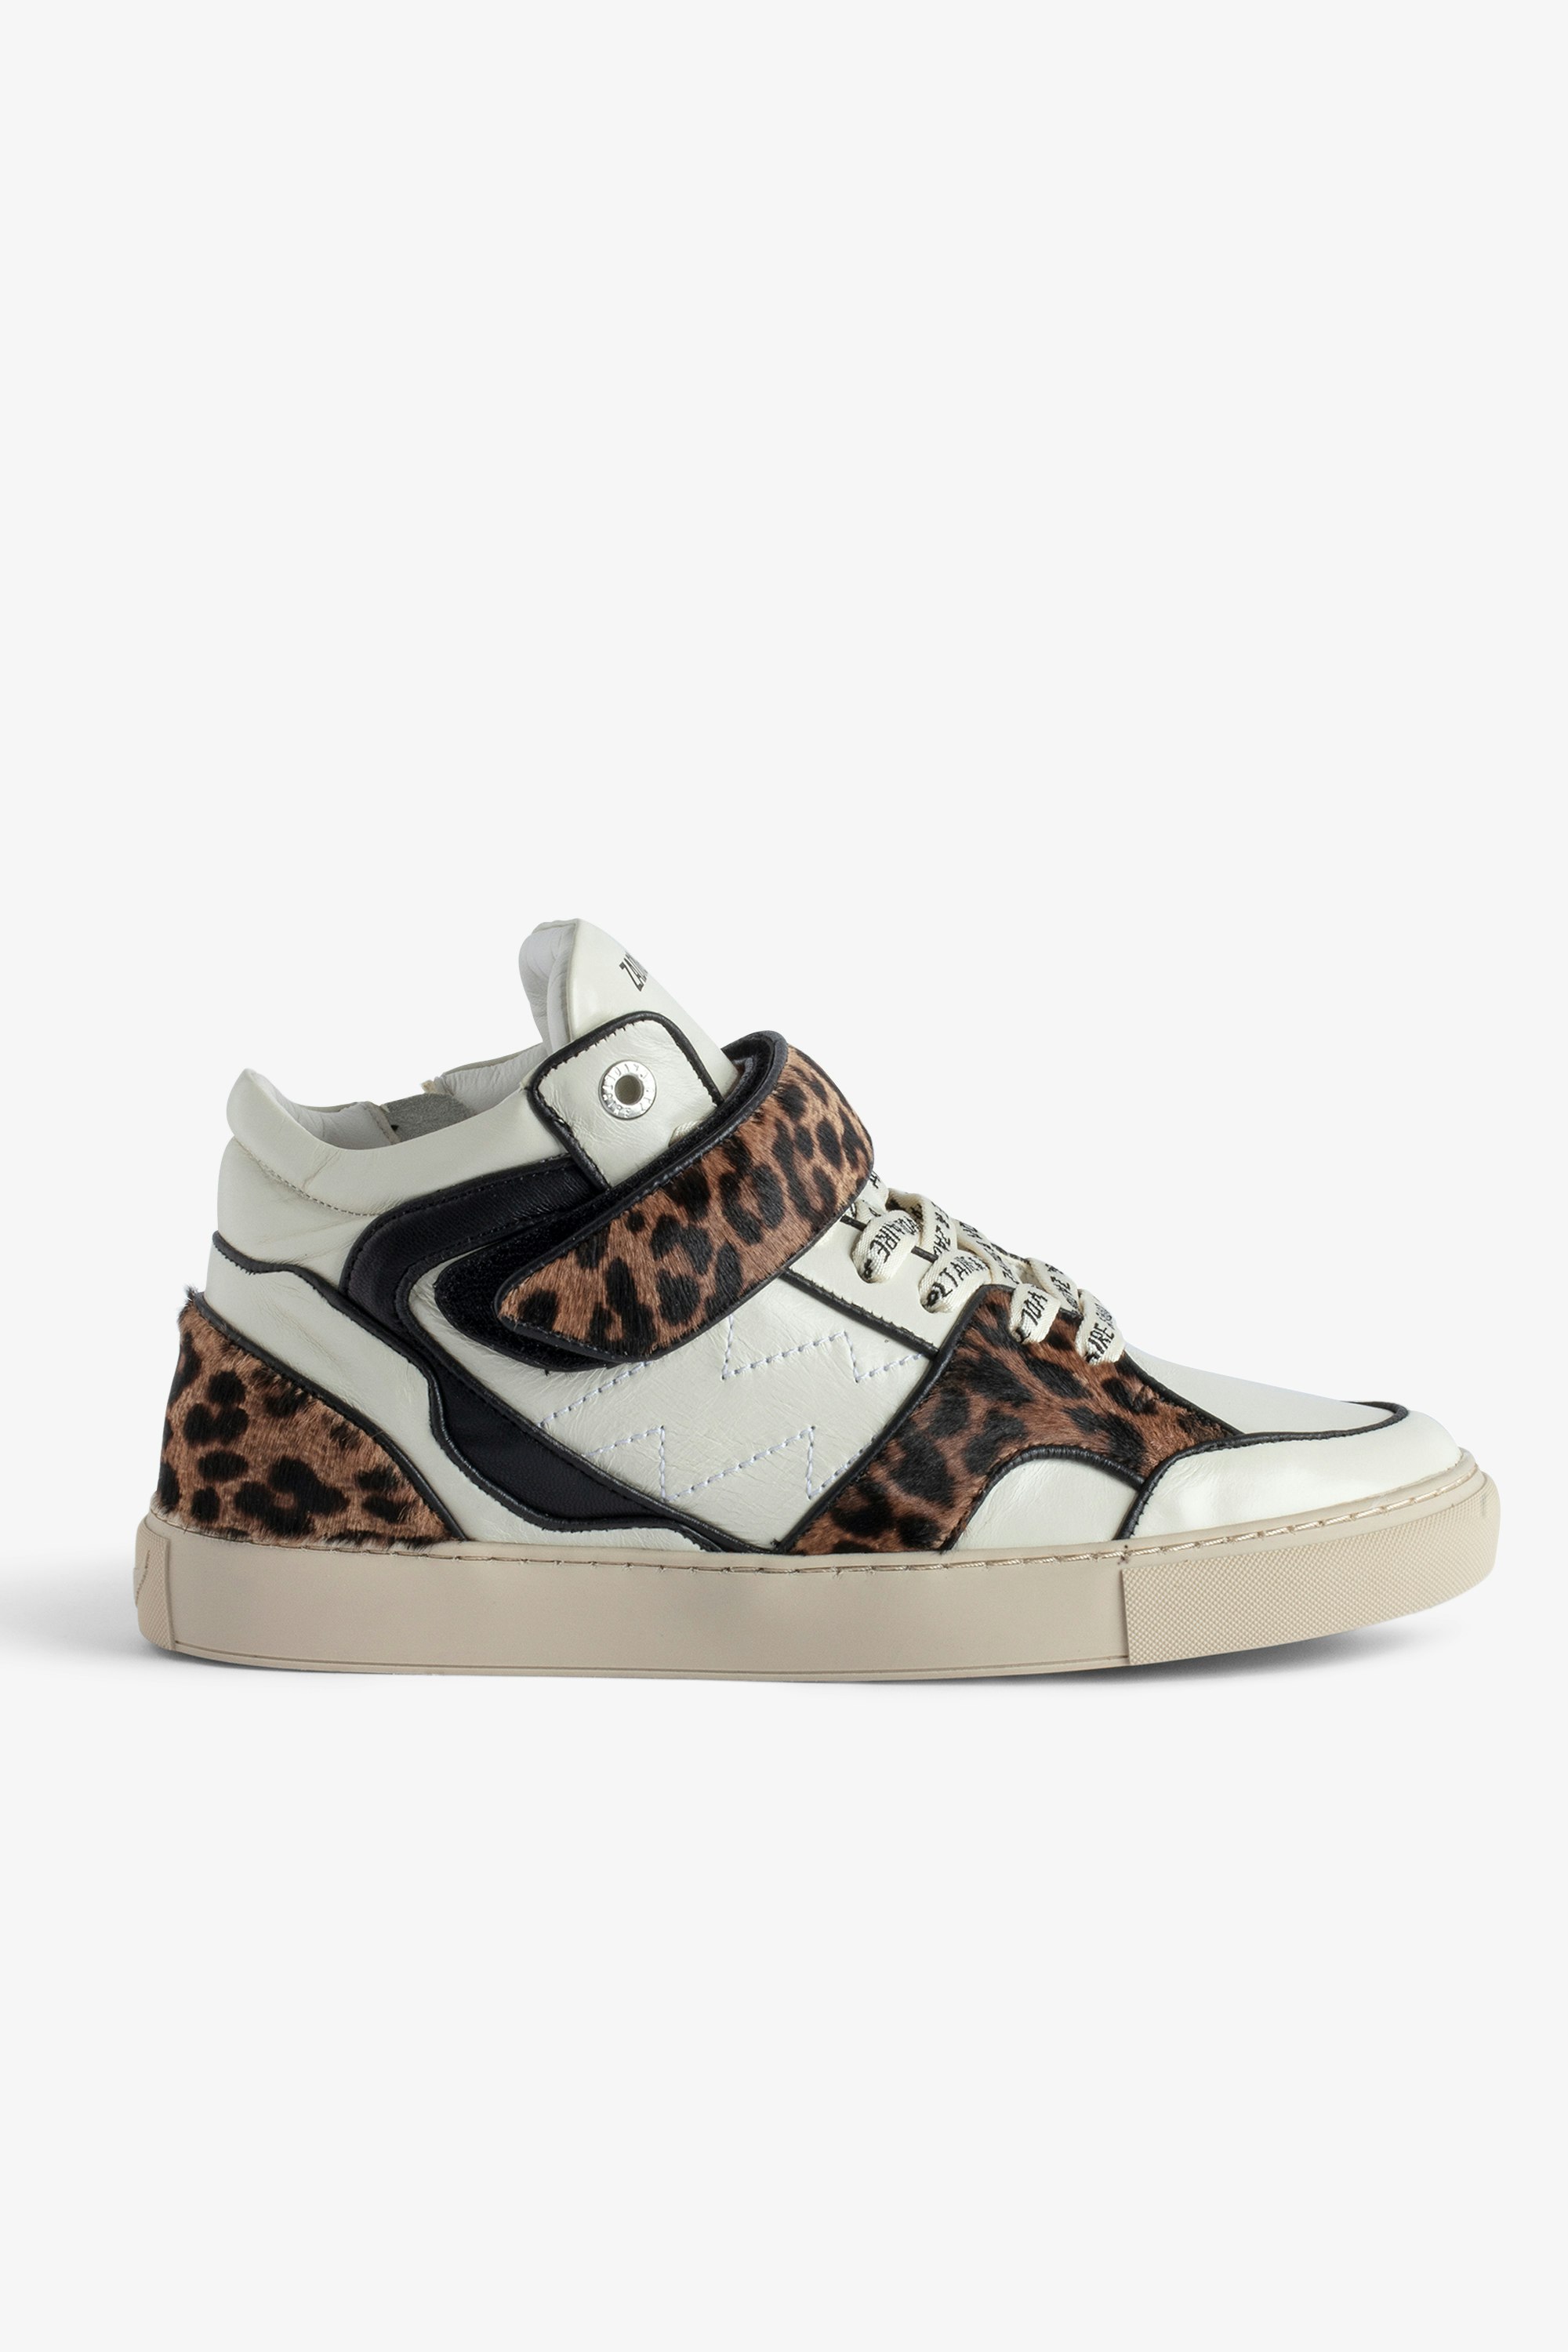 ZV1747 Mid Flash Sneakers  - Women’s leopard-effect brown leather mid-top sneakers with contrasting panels and Velcro fastening.